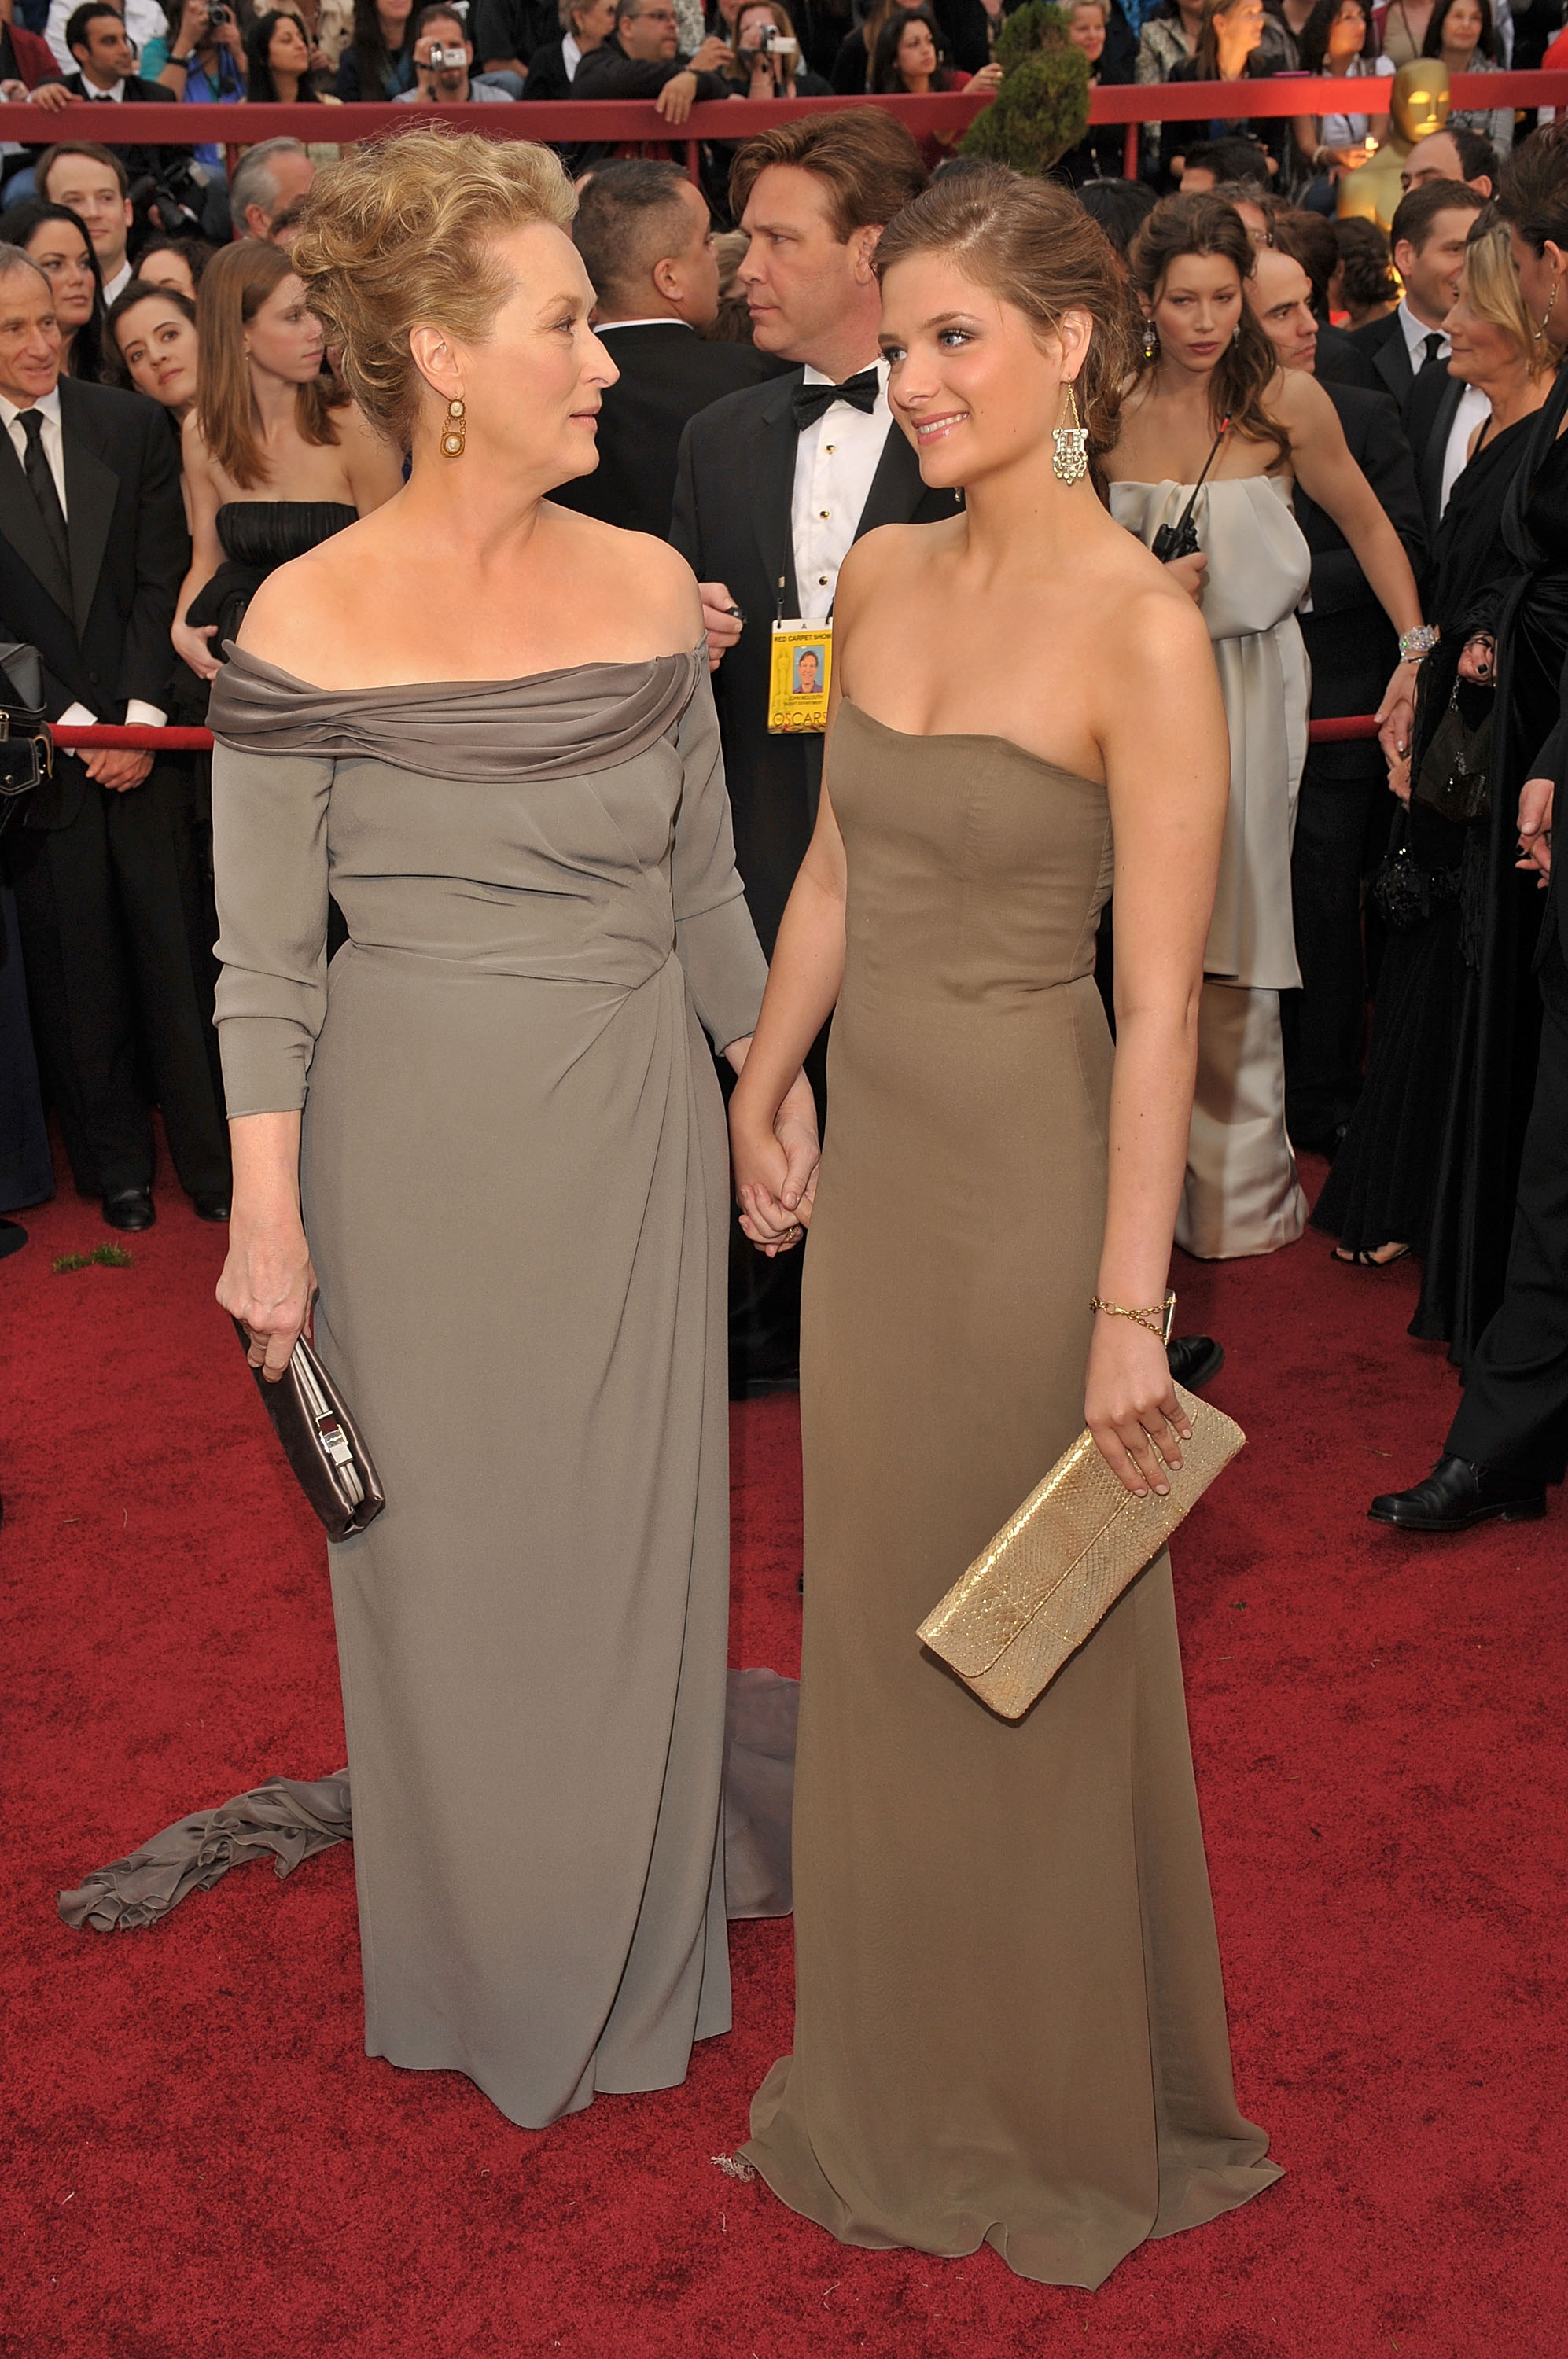 Meryl Streep and Louisa Jacobson Gummer (R) in Hollywood, California on February 22, 2009 | Source: Getty Images